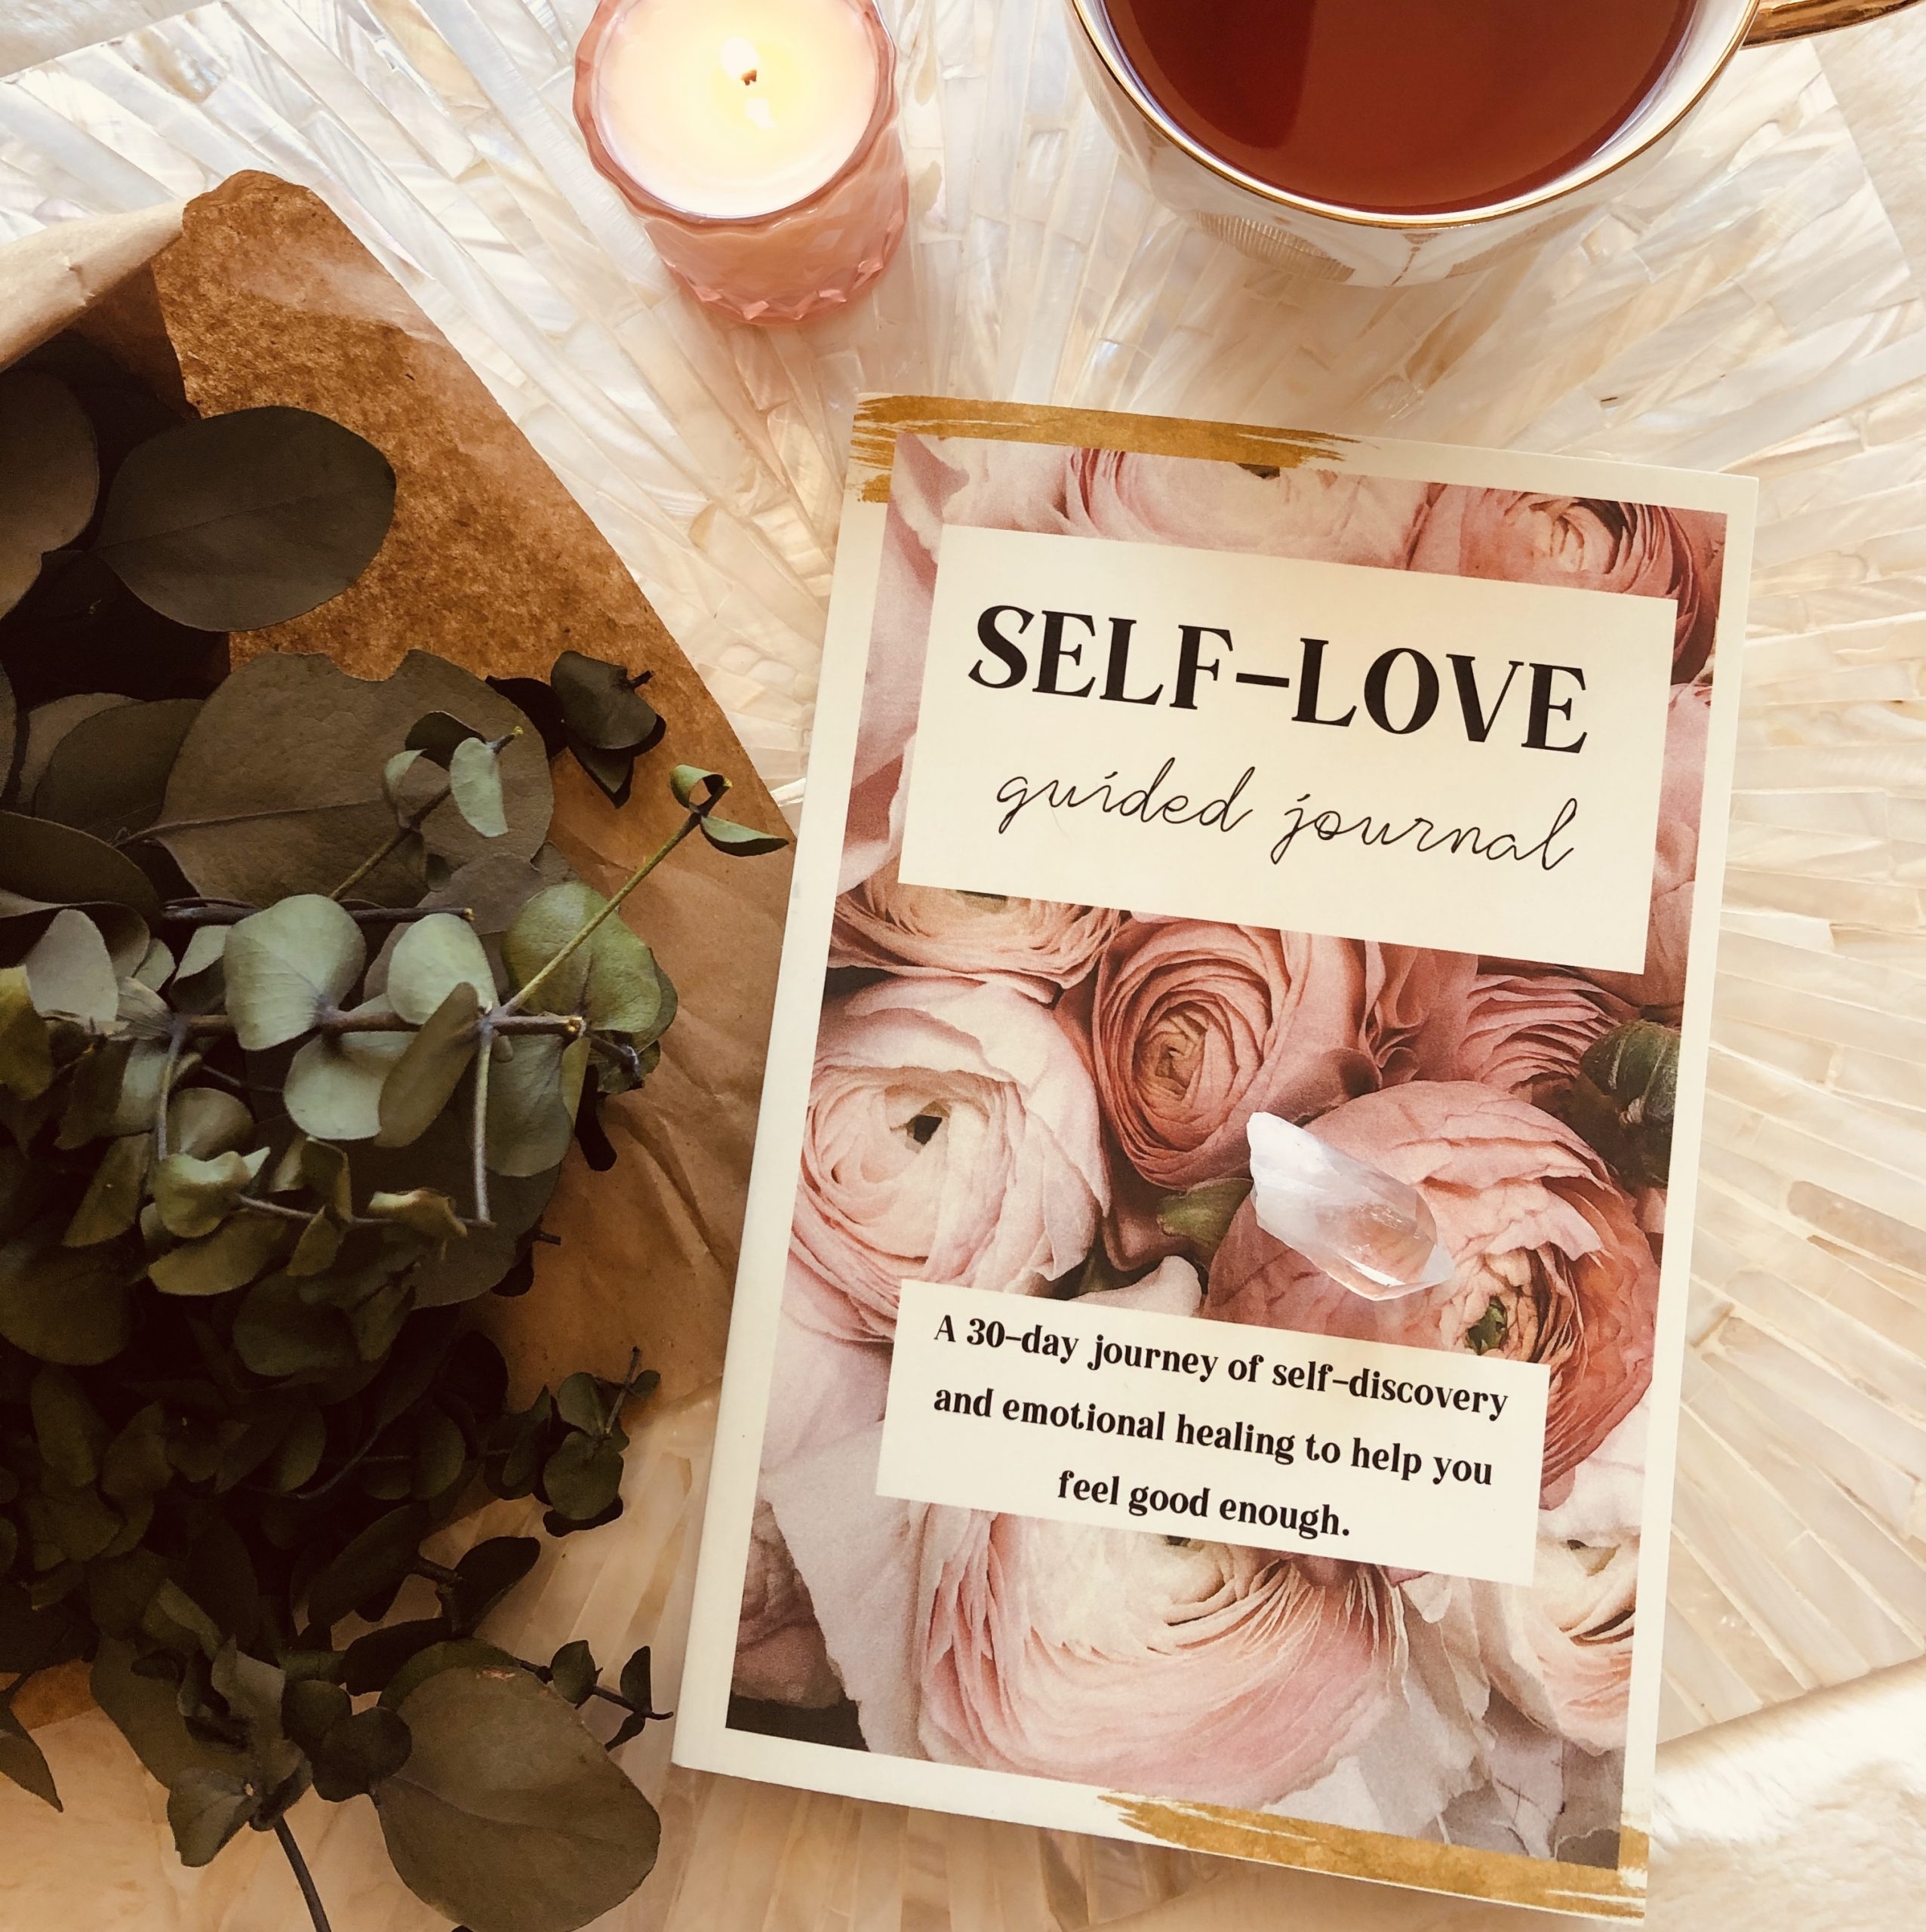 the self love guided journal that supports you in your journaling journey into your soul